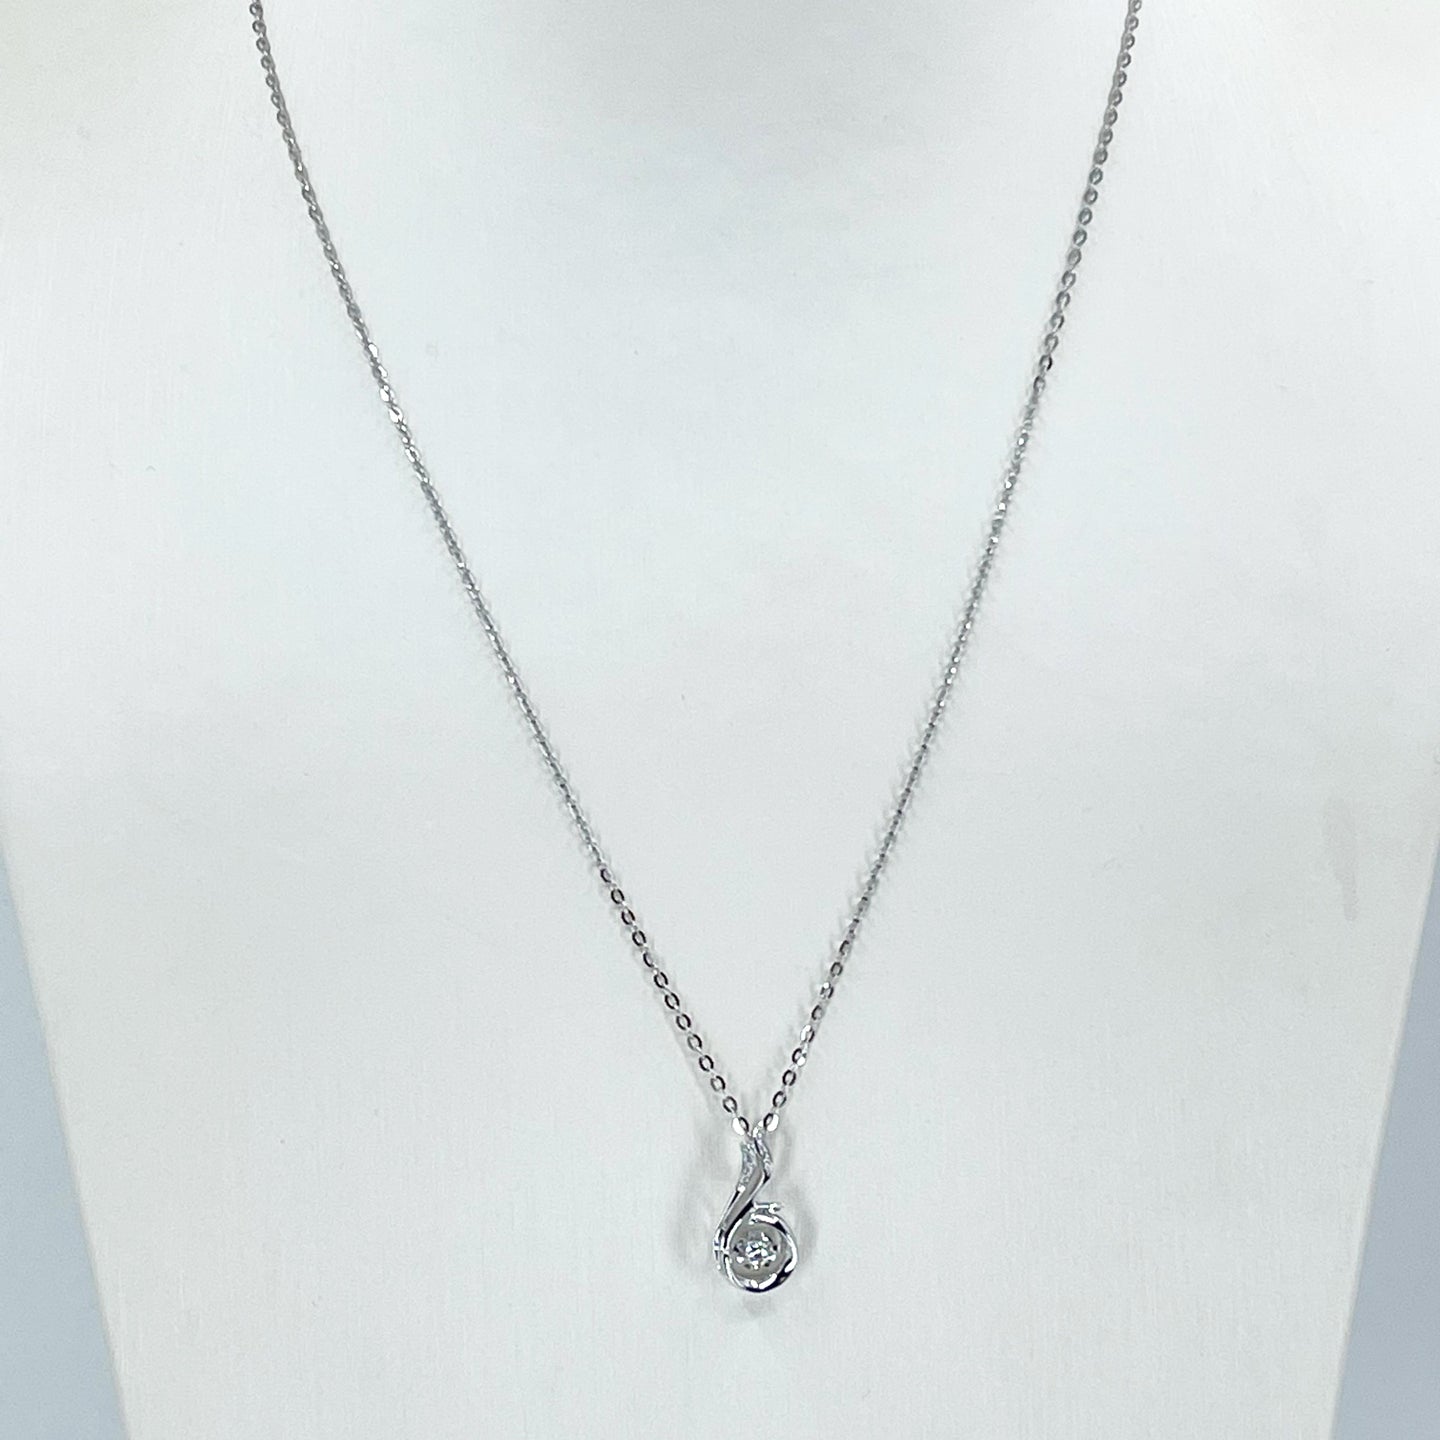 18K Solid White Gold Round Link Chain Necklace with Diamond Pendant 17